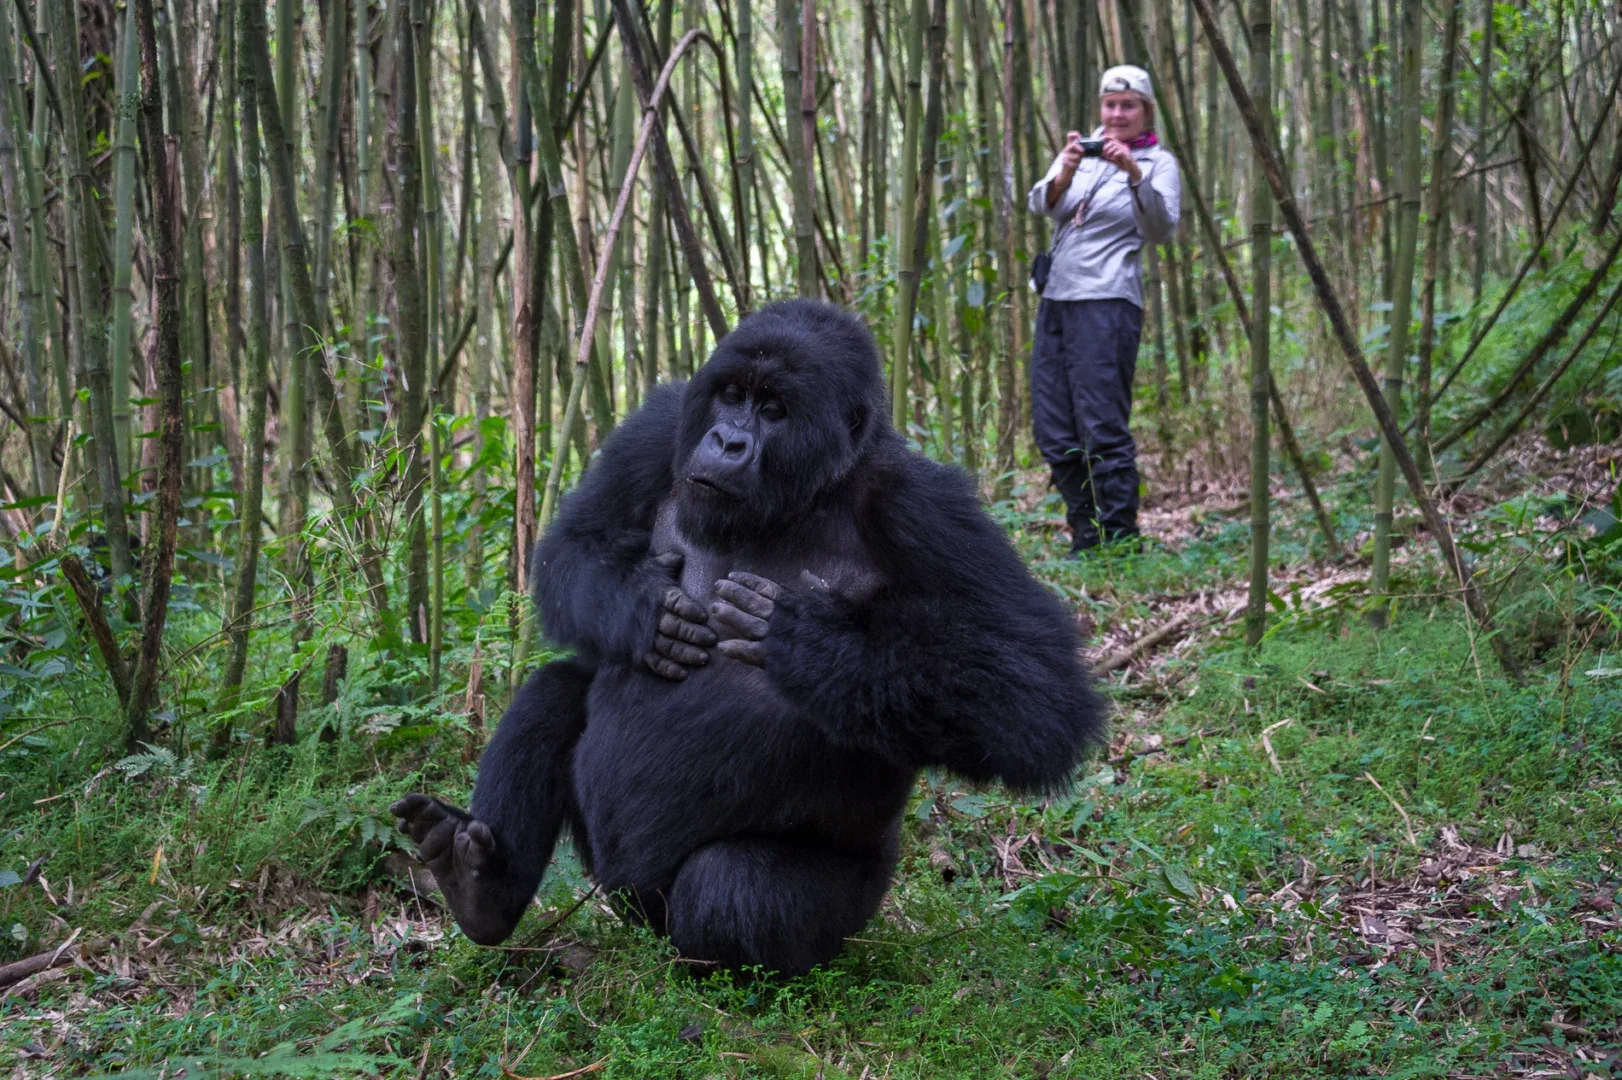 What-You-Need-To-Know-About-Gorilla-Permit-Uganda